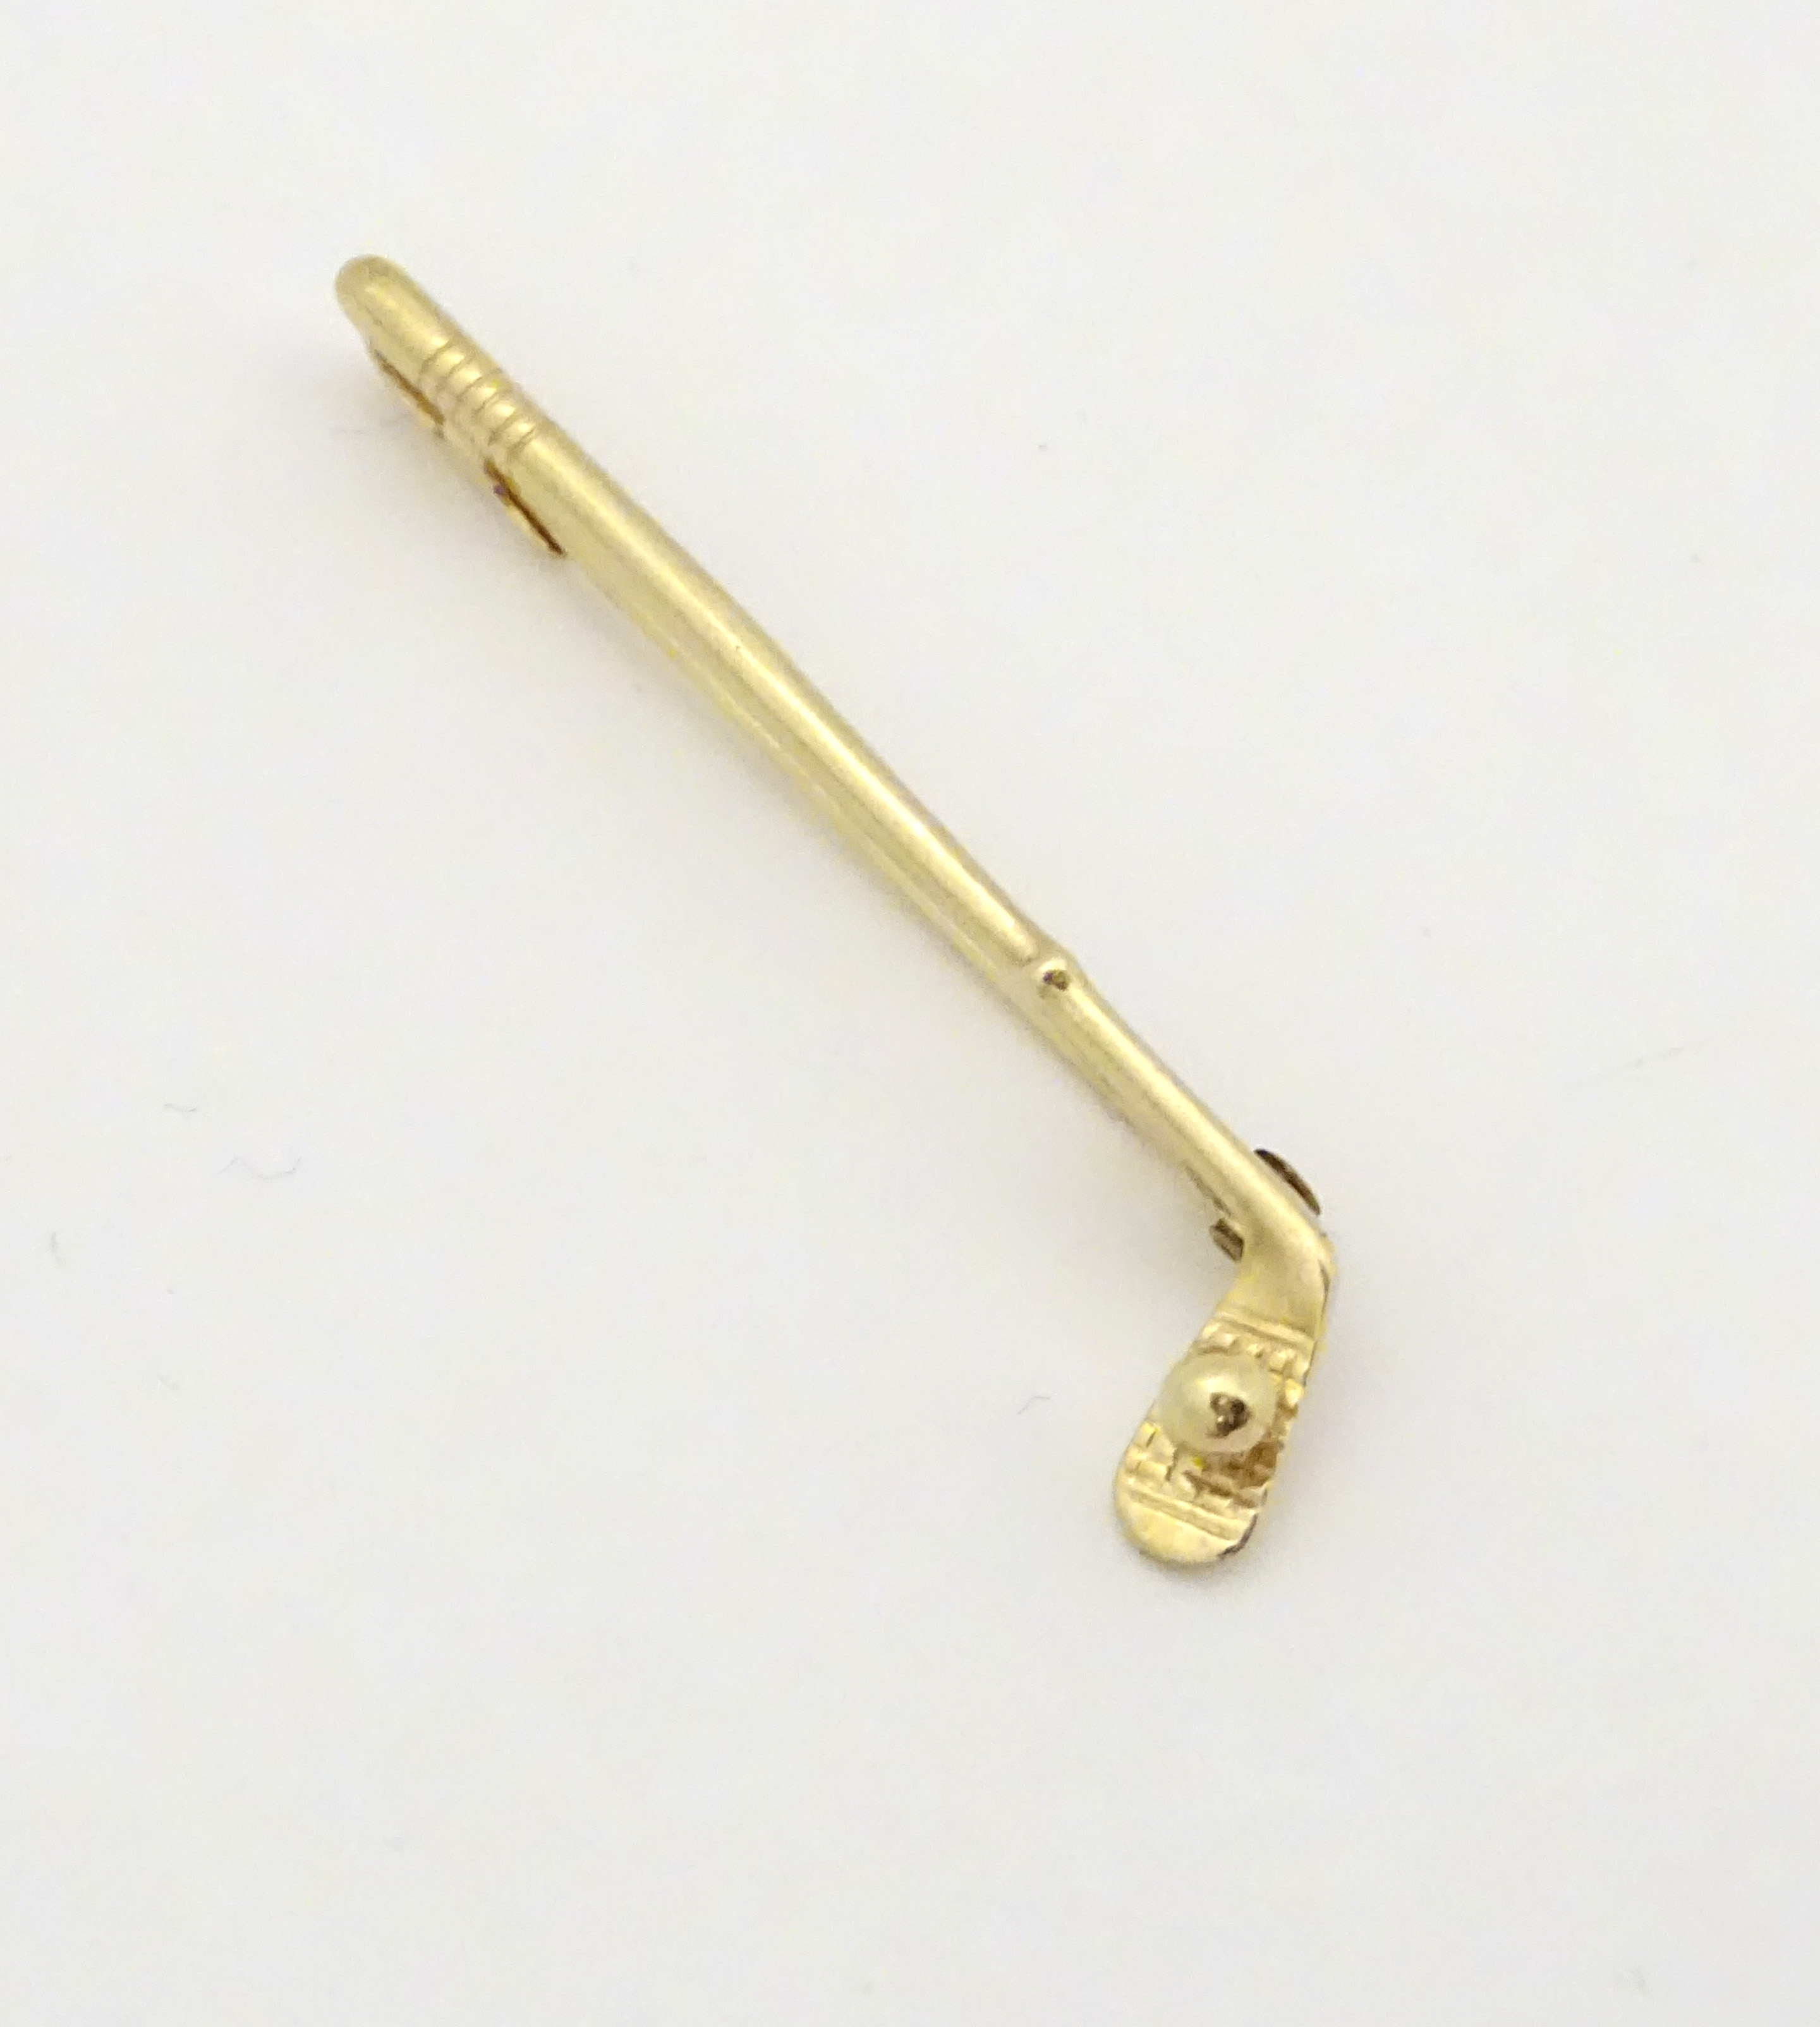 A 9ct gold brooch / pin formed as a golf club and ball.